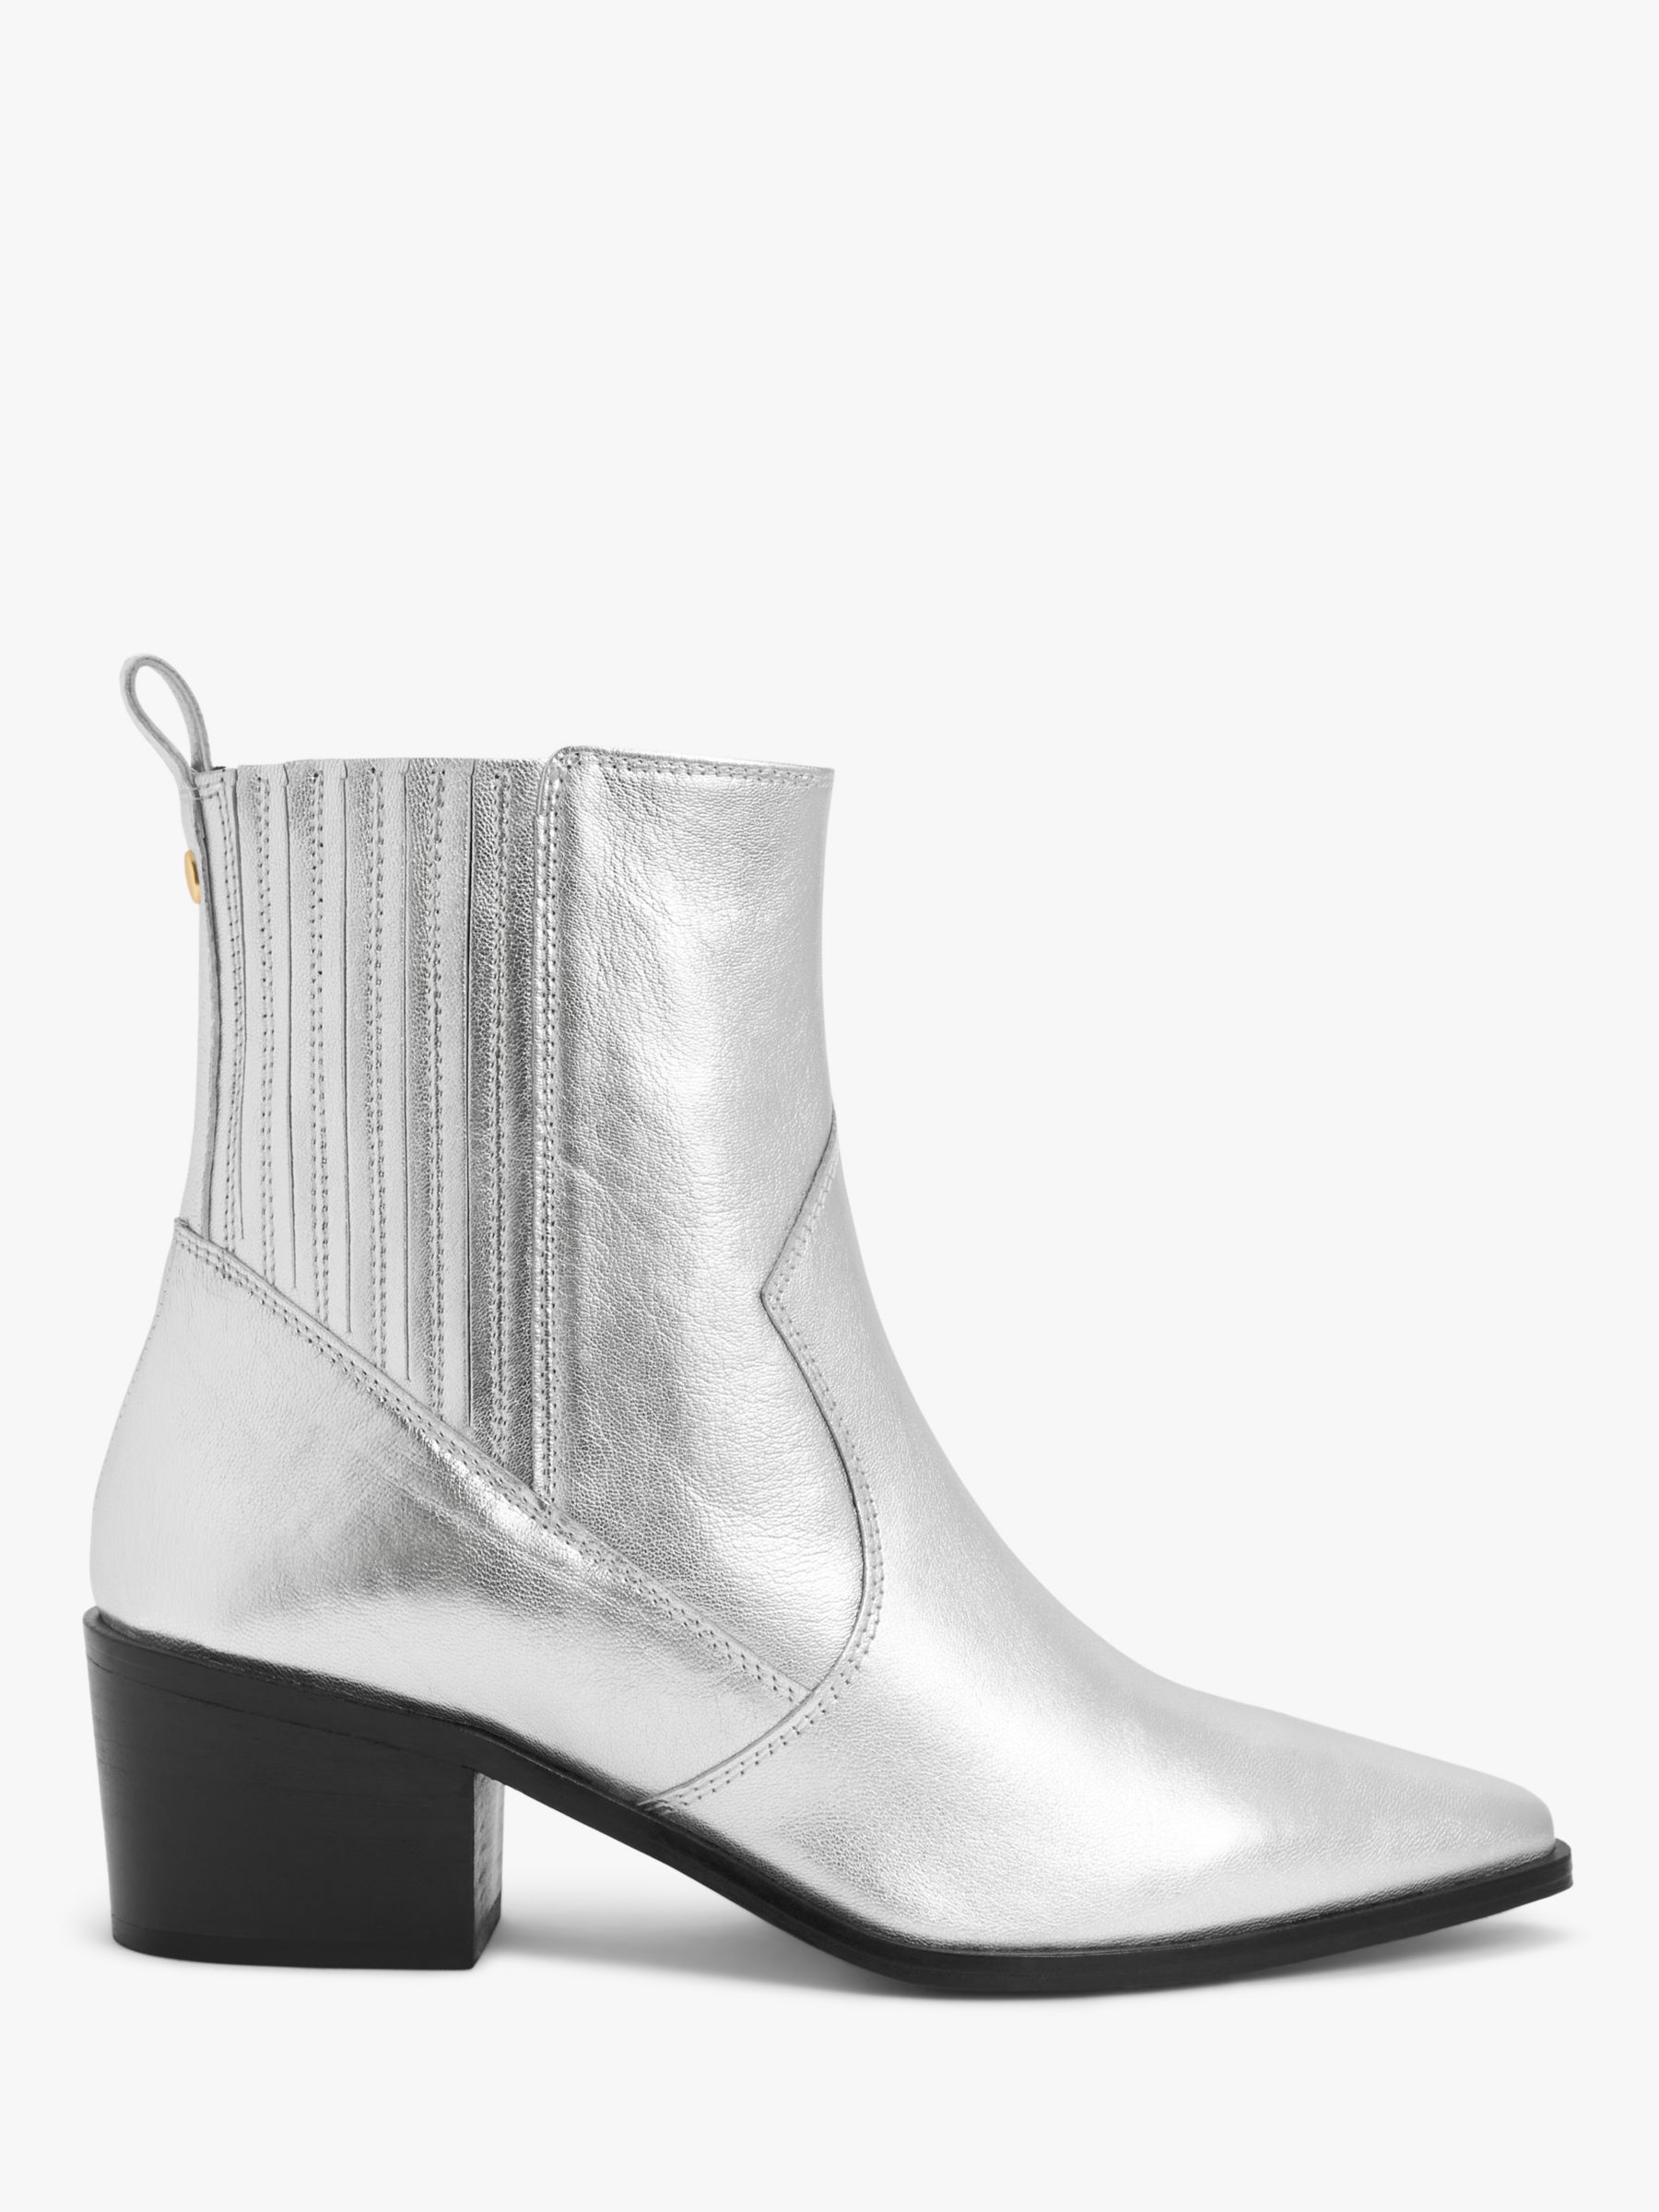 AND/OR Pixie Leather Heeled Chelsea Western Boots, Silver at John Lewis ...